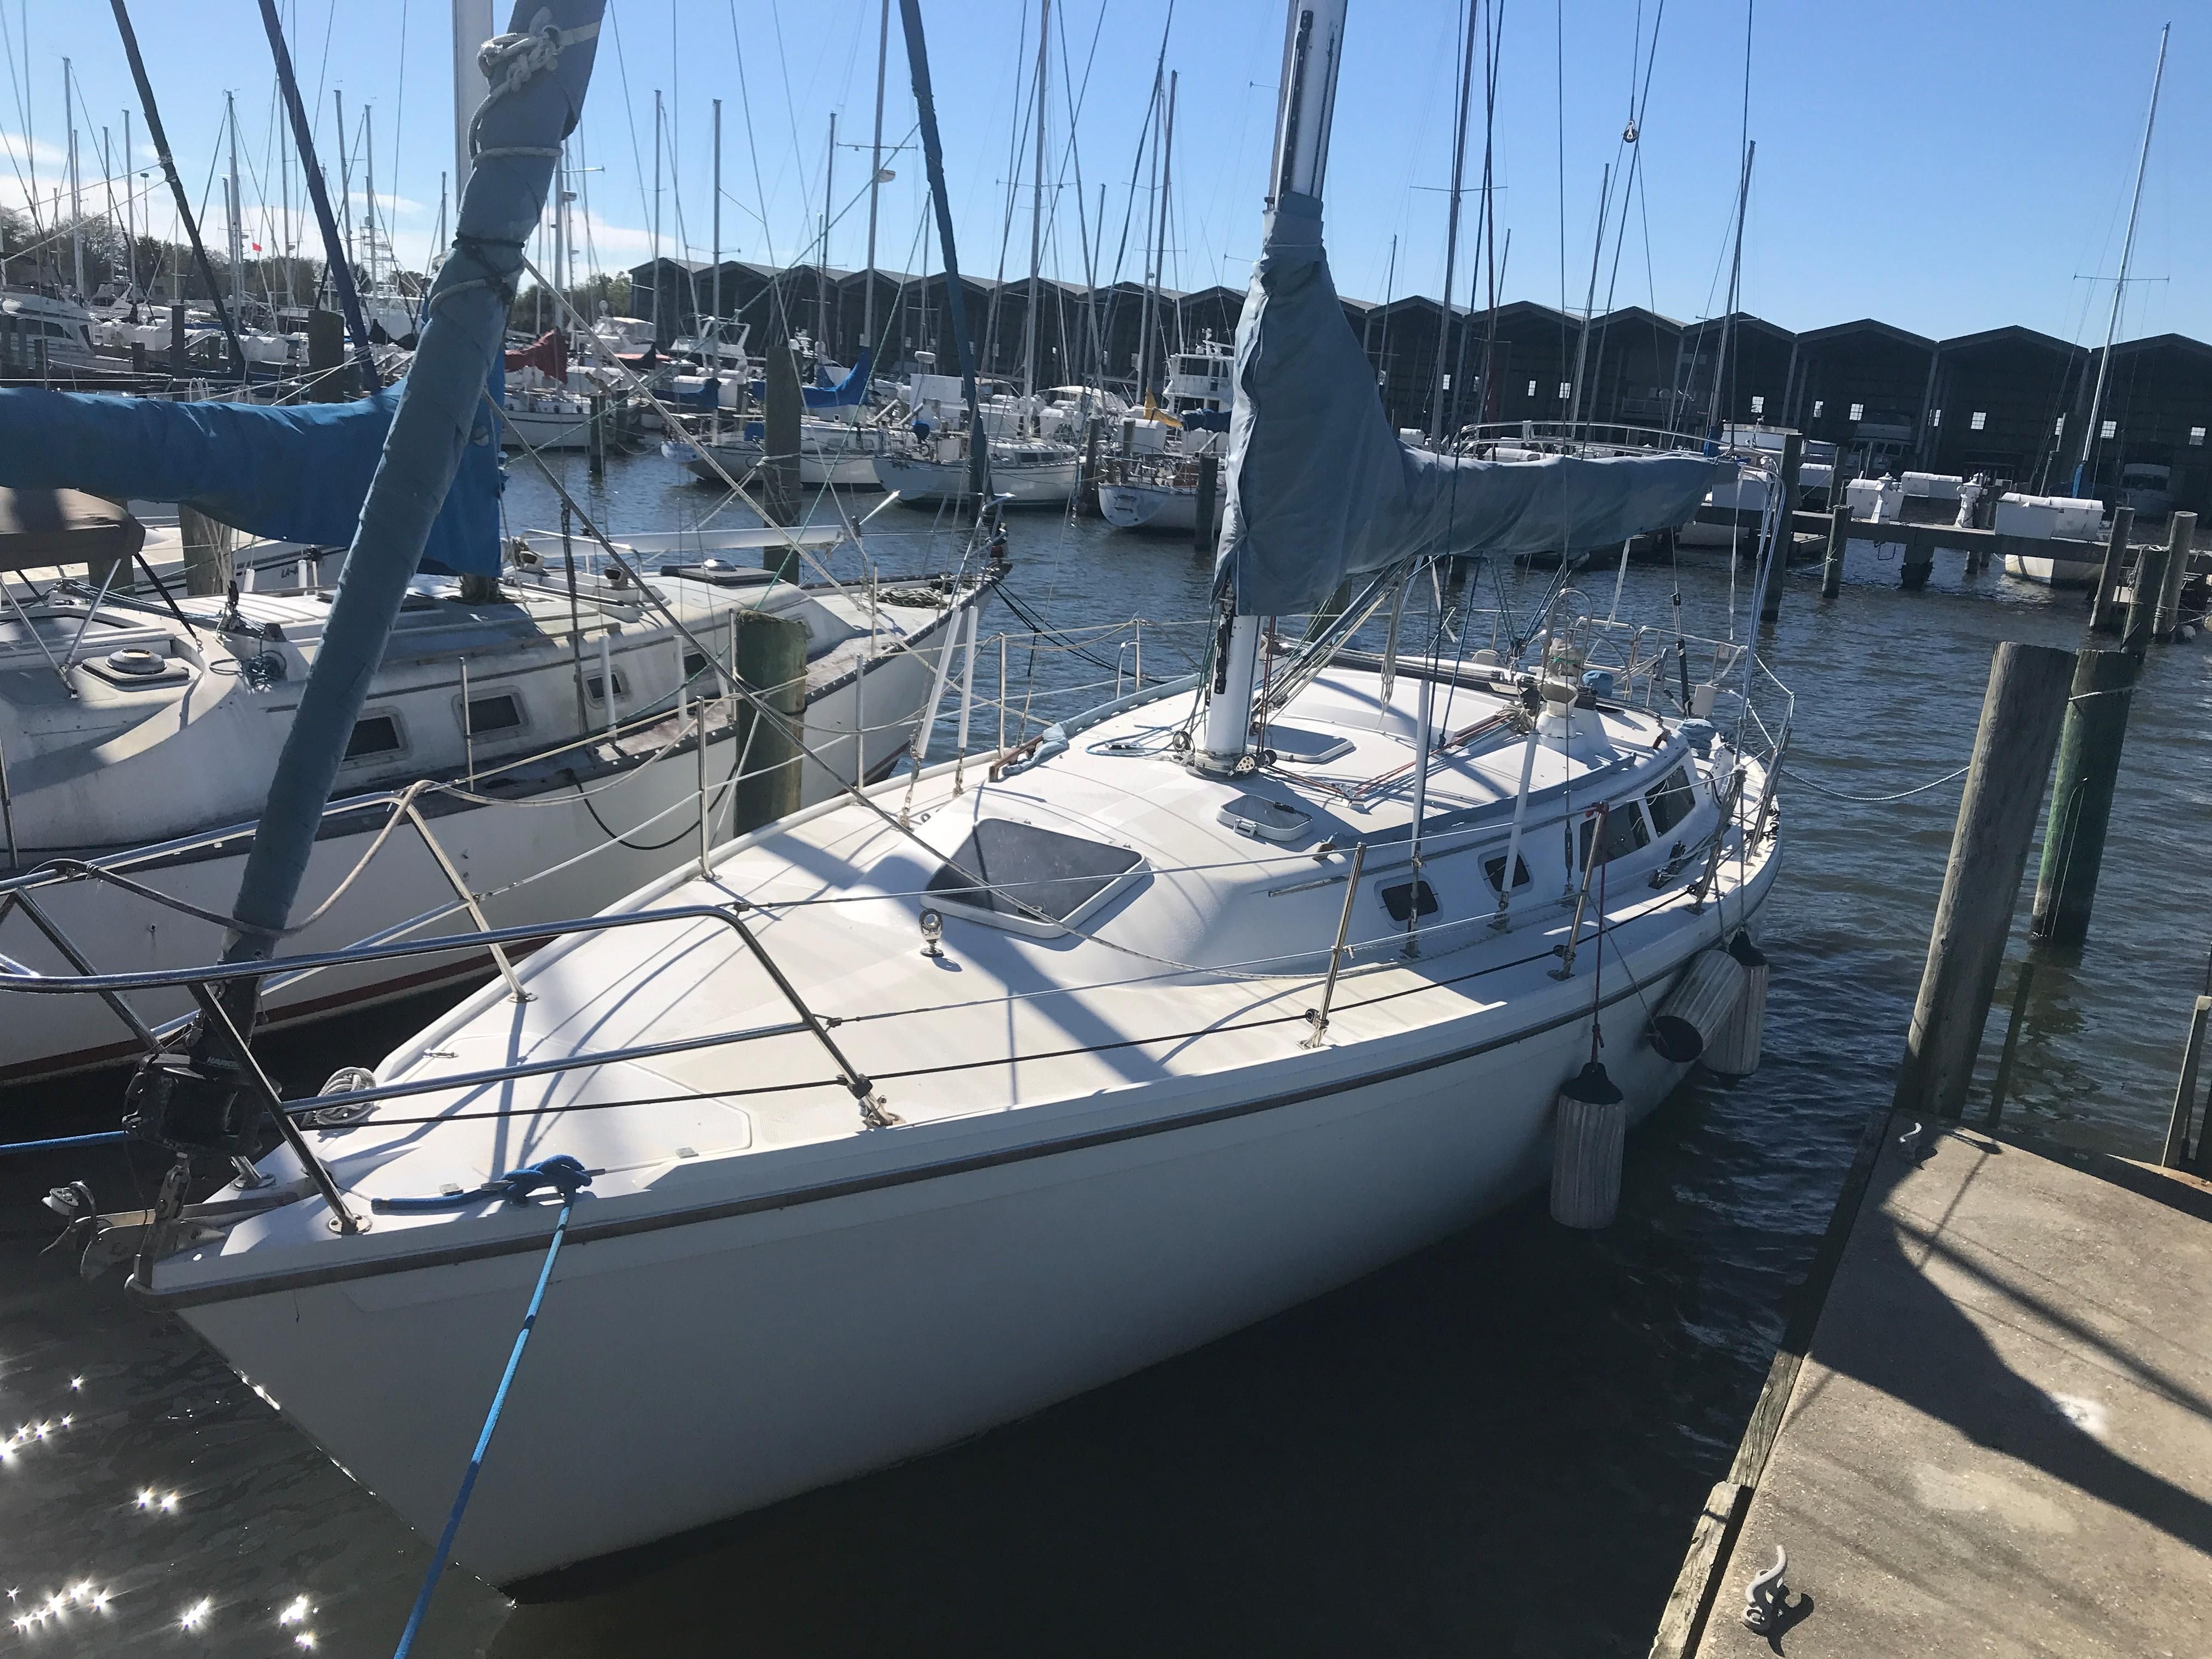 36 ft catalina sailboat for sale